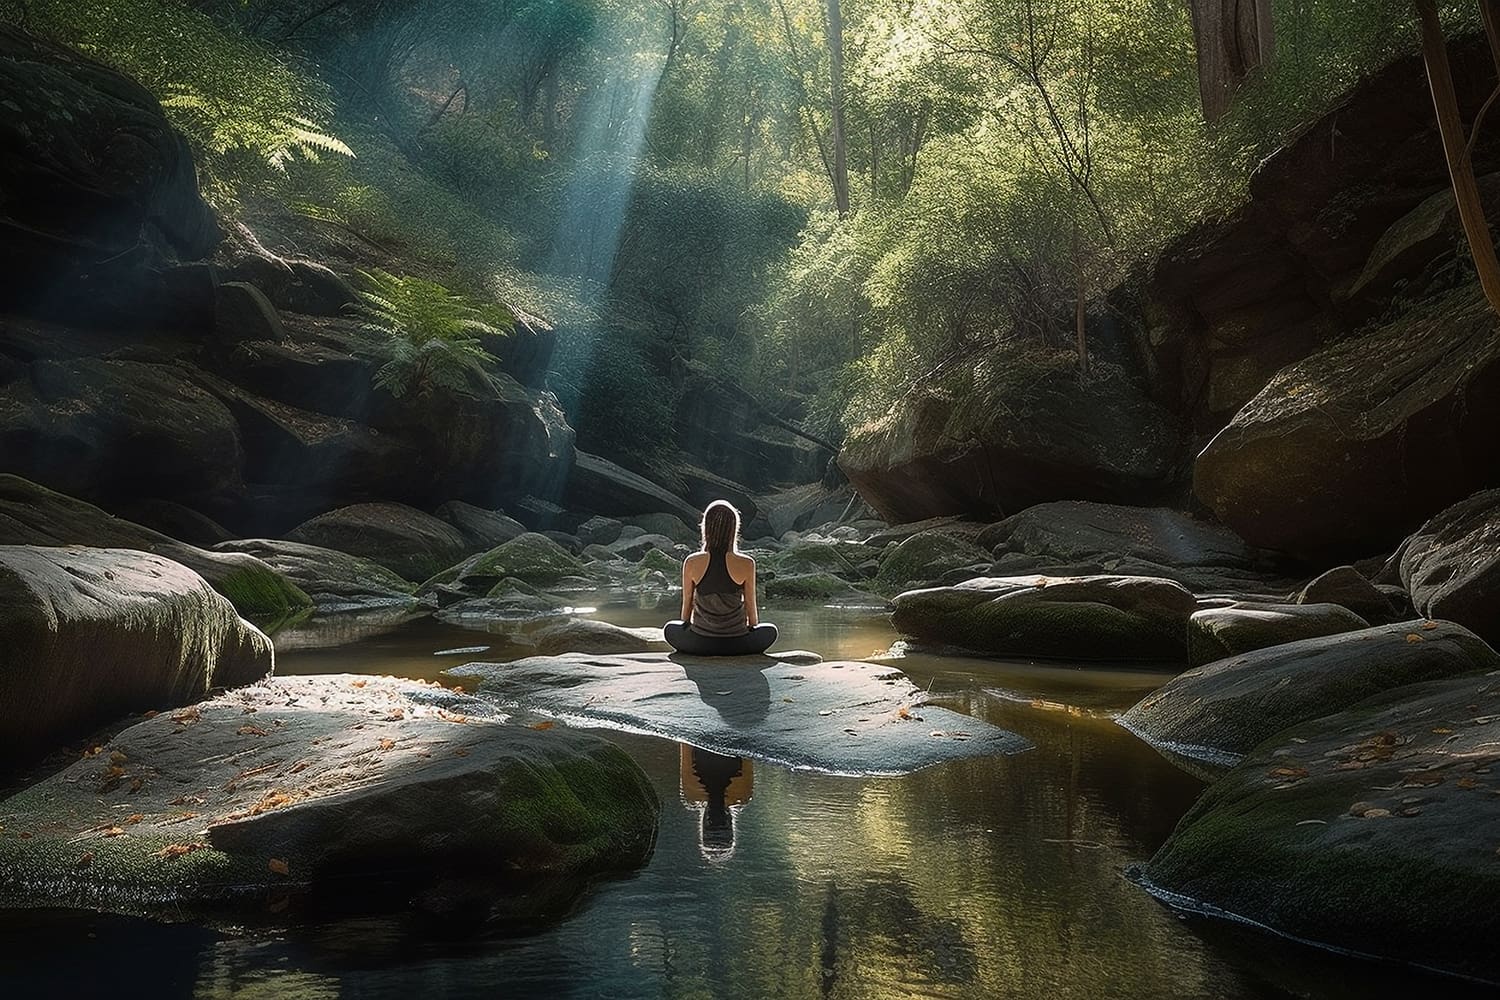 A person sits meditating on a rock in a serene forest stream, reflecting on personal growth. Sunlight filters through the dense canopy, casting rays of light across the peaceful scene. Large moss-covered rocks and lush greenery surround the area, creating a tranquil atmosphere.